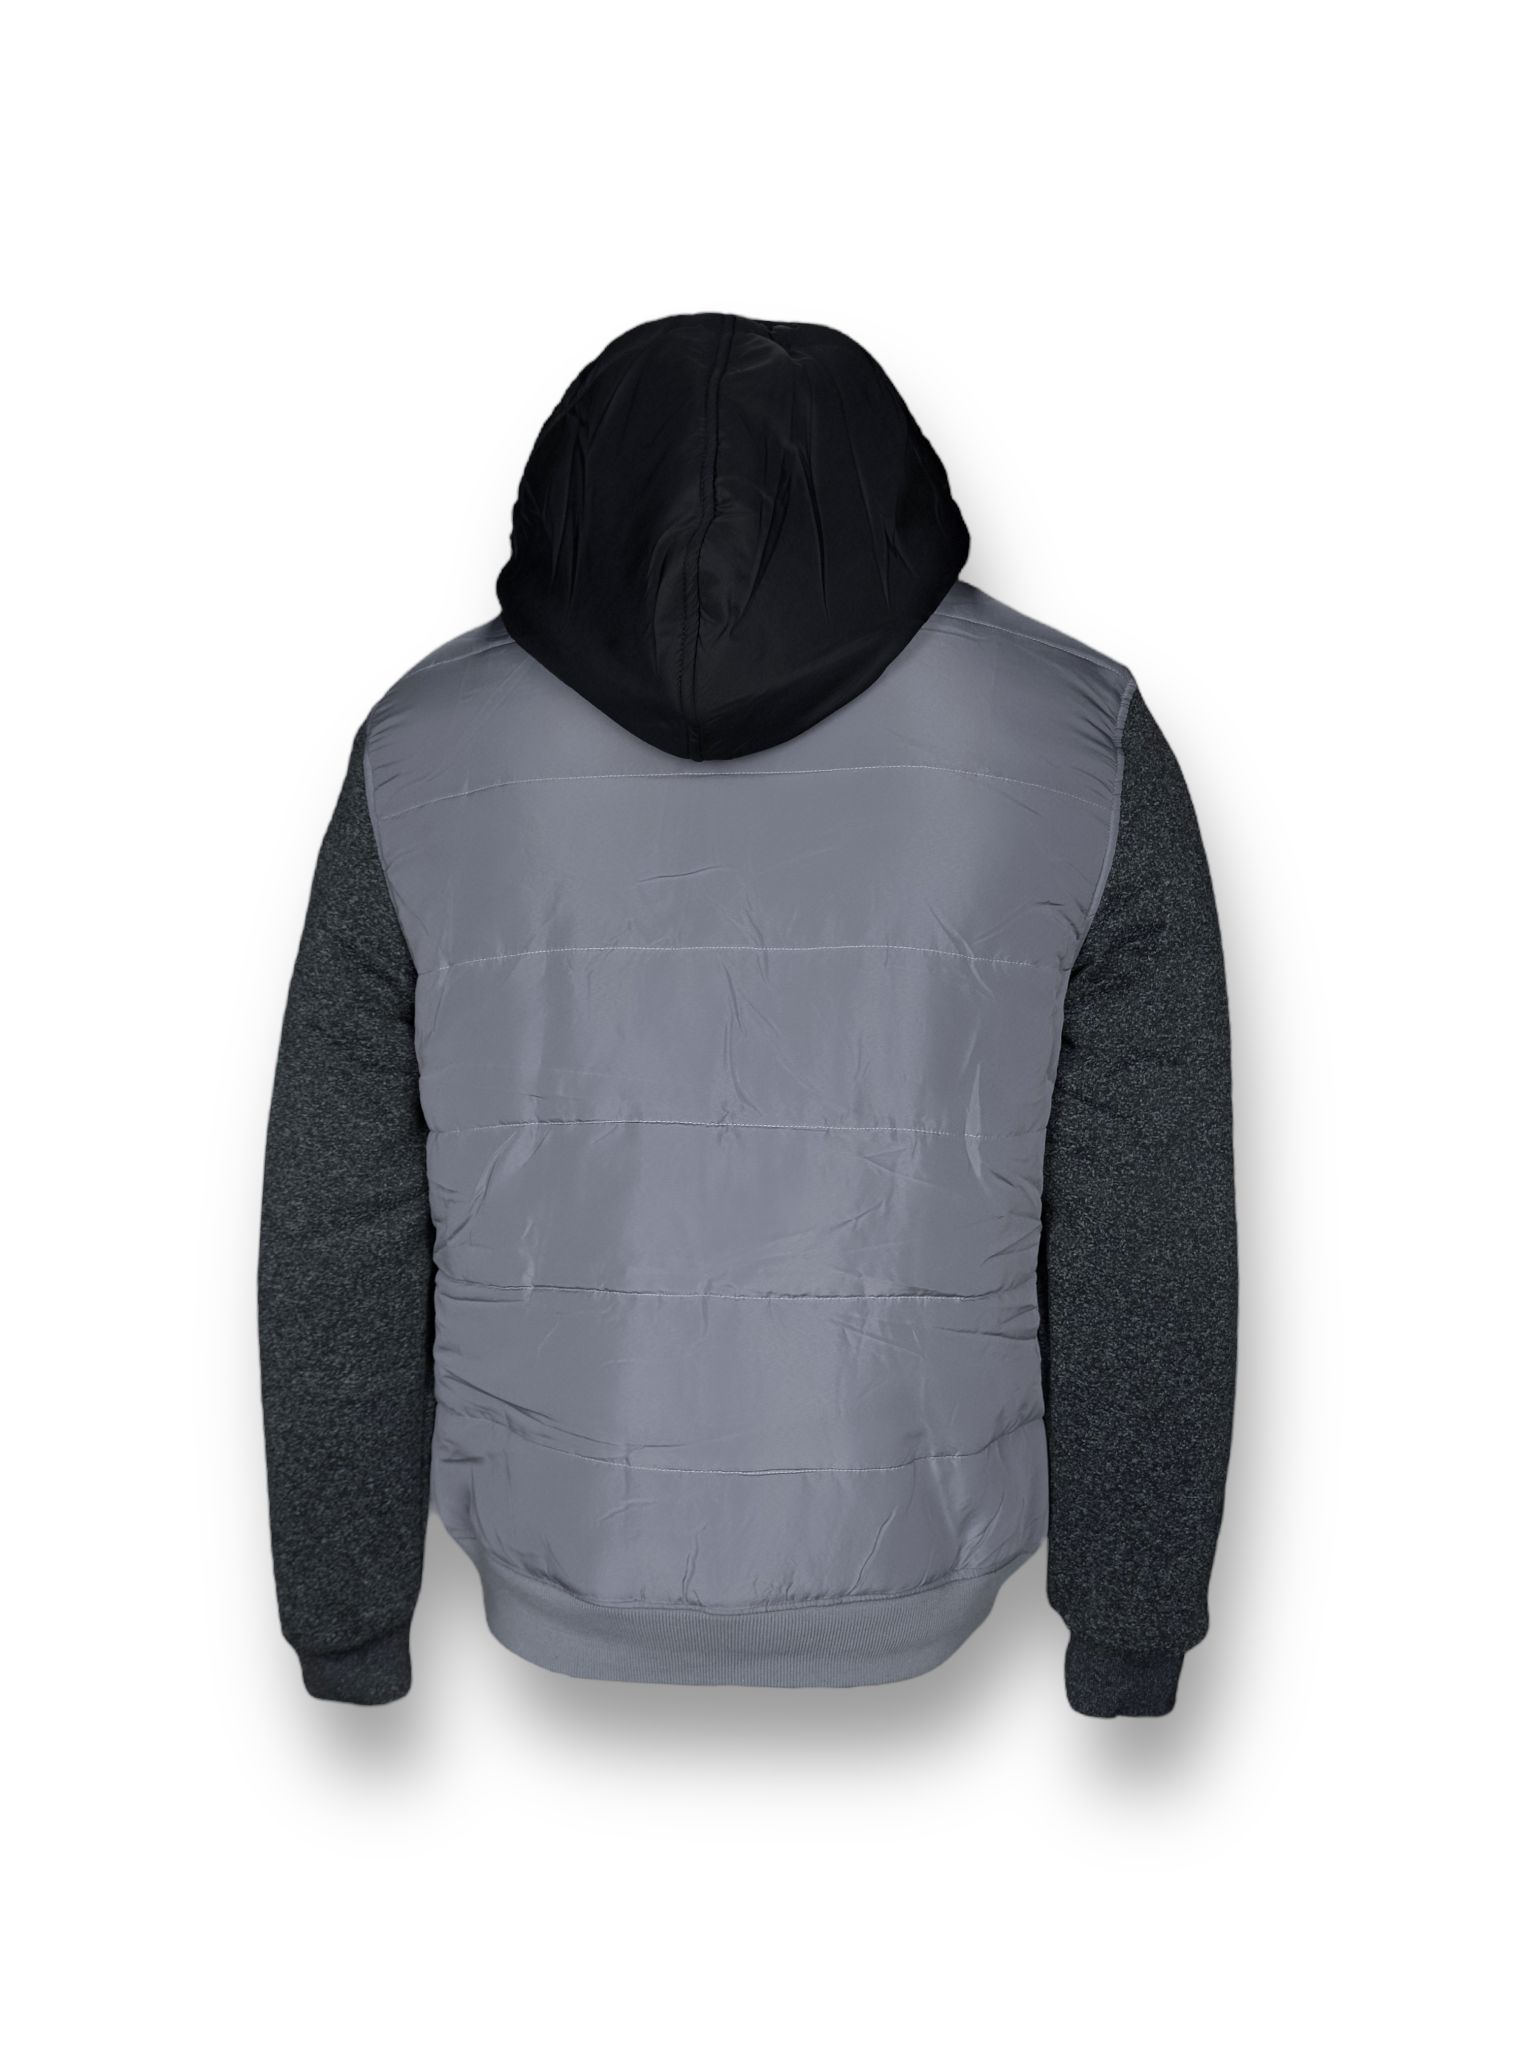 MS100-442 GREY HOODY WITH CORD